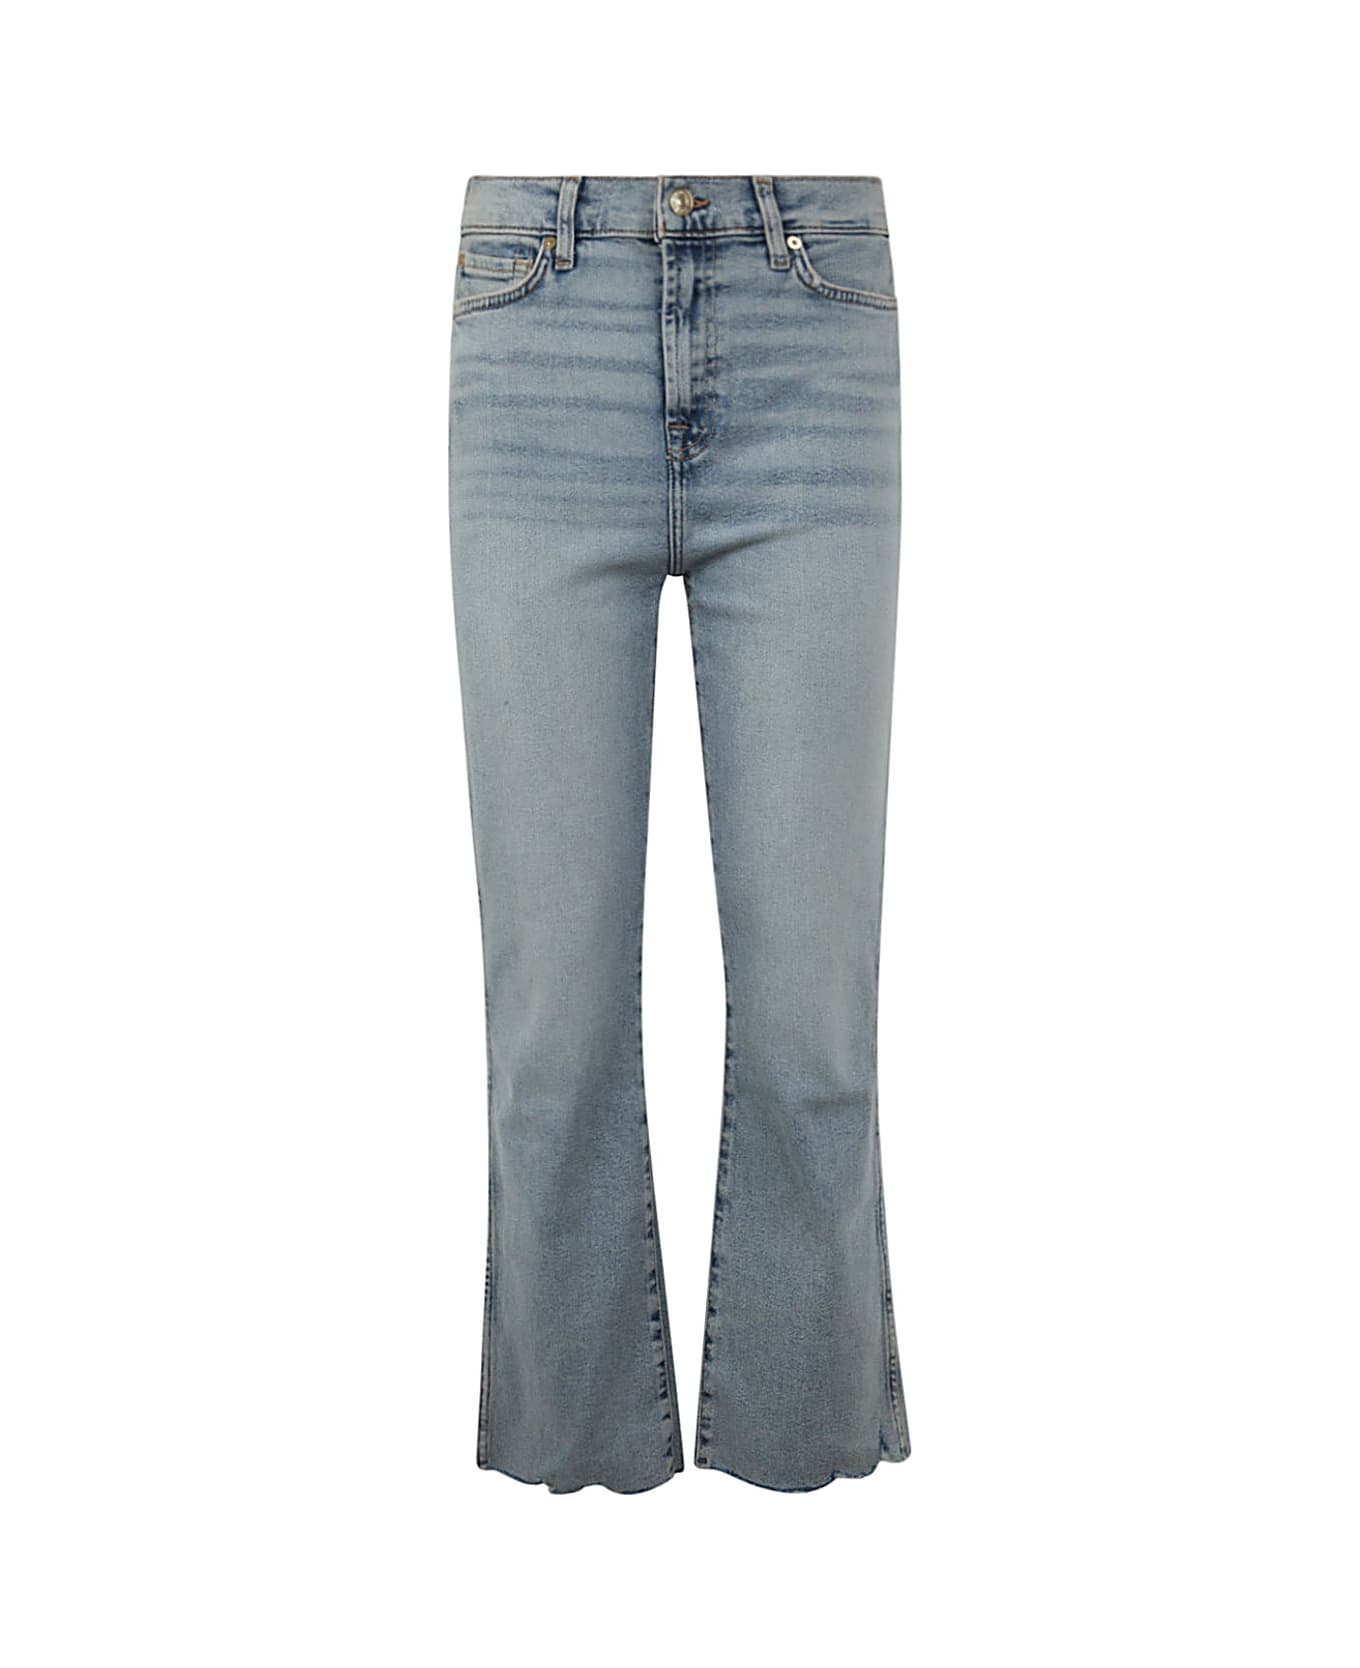 7 For All Mankind Hw Slim Kick Luxe Vintage Sunday With Distressed Hem - Light Blue デニム